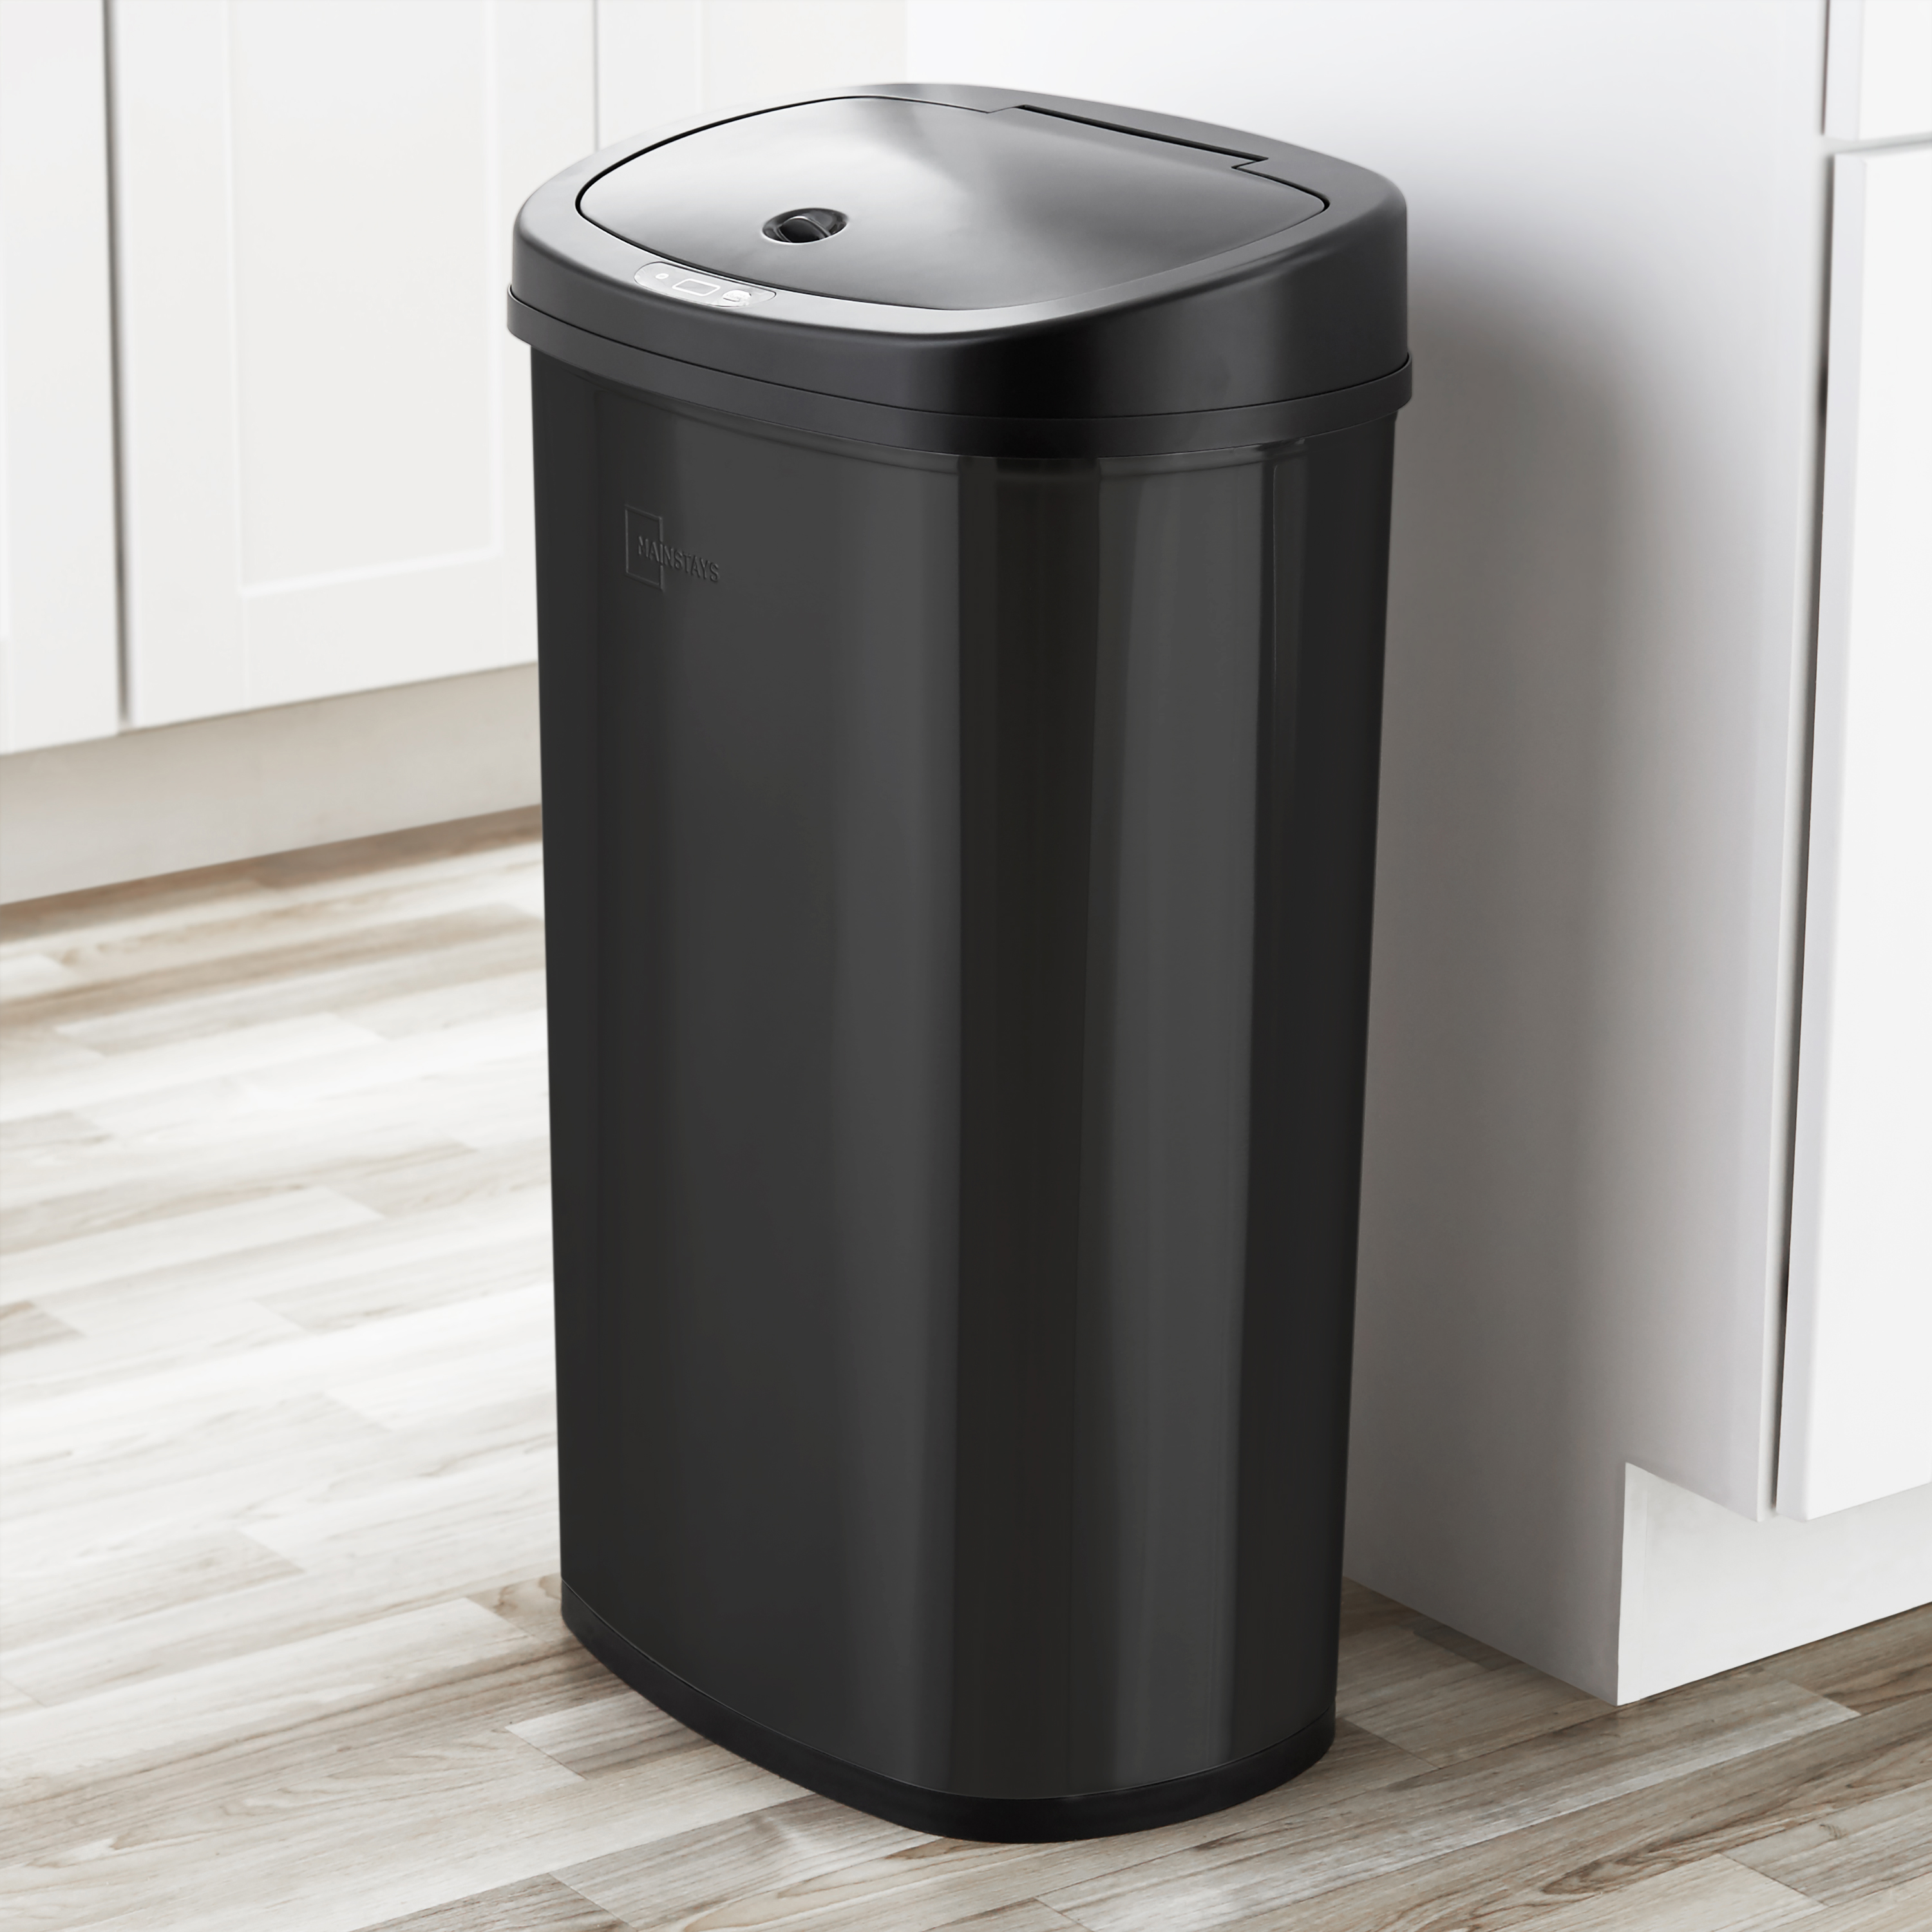 Mainstays 13.2 gal /50 L Motion Sensor Kitchen Garbage Can, Black Stainless Steel - image 4 of 12